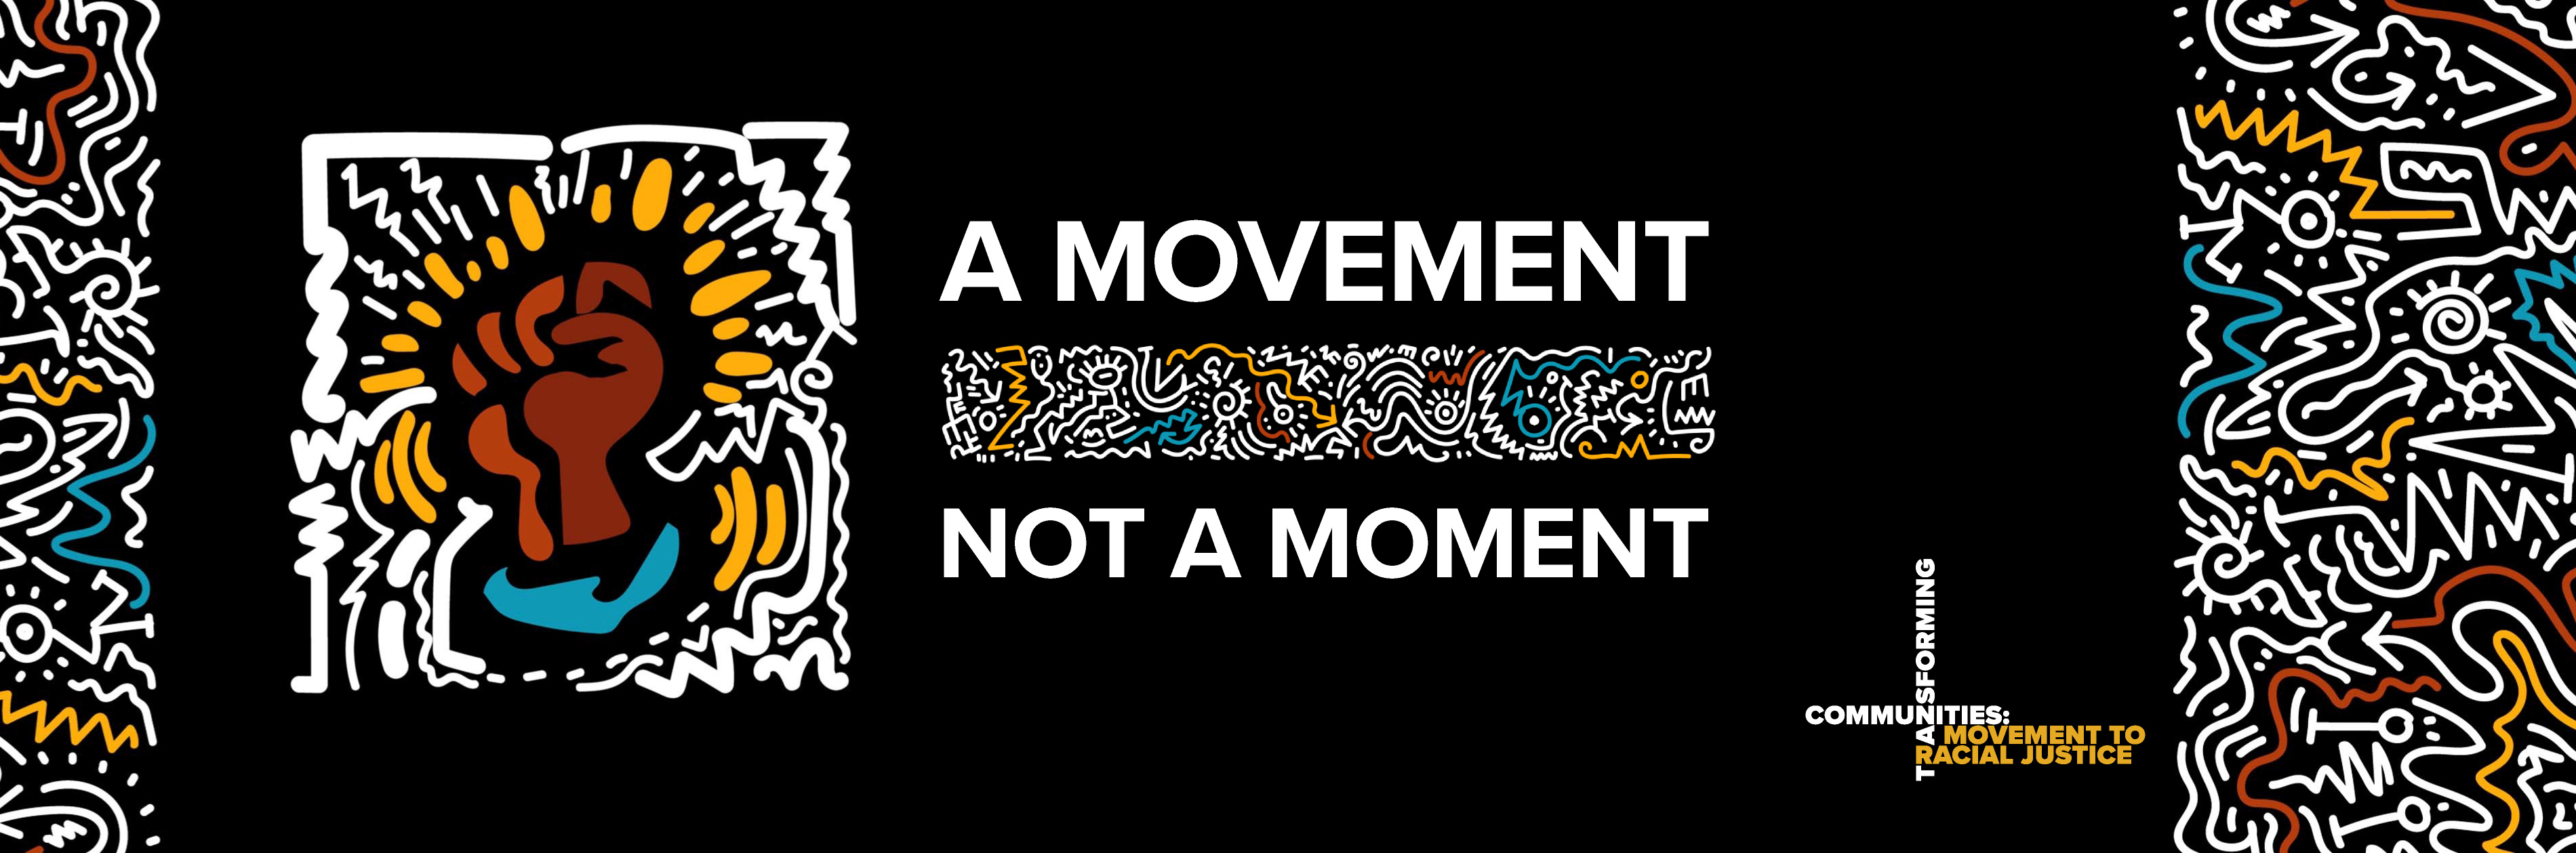 Illustration of a power fist with the words A Movement, Not a Moment.